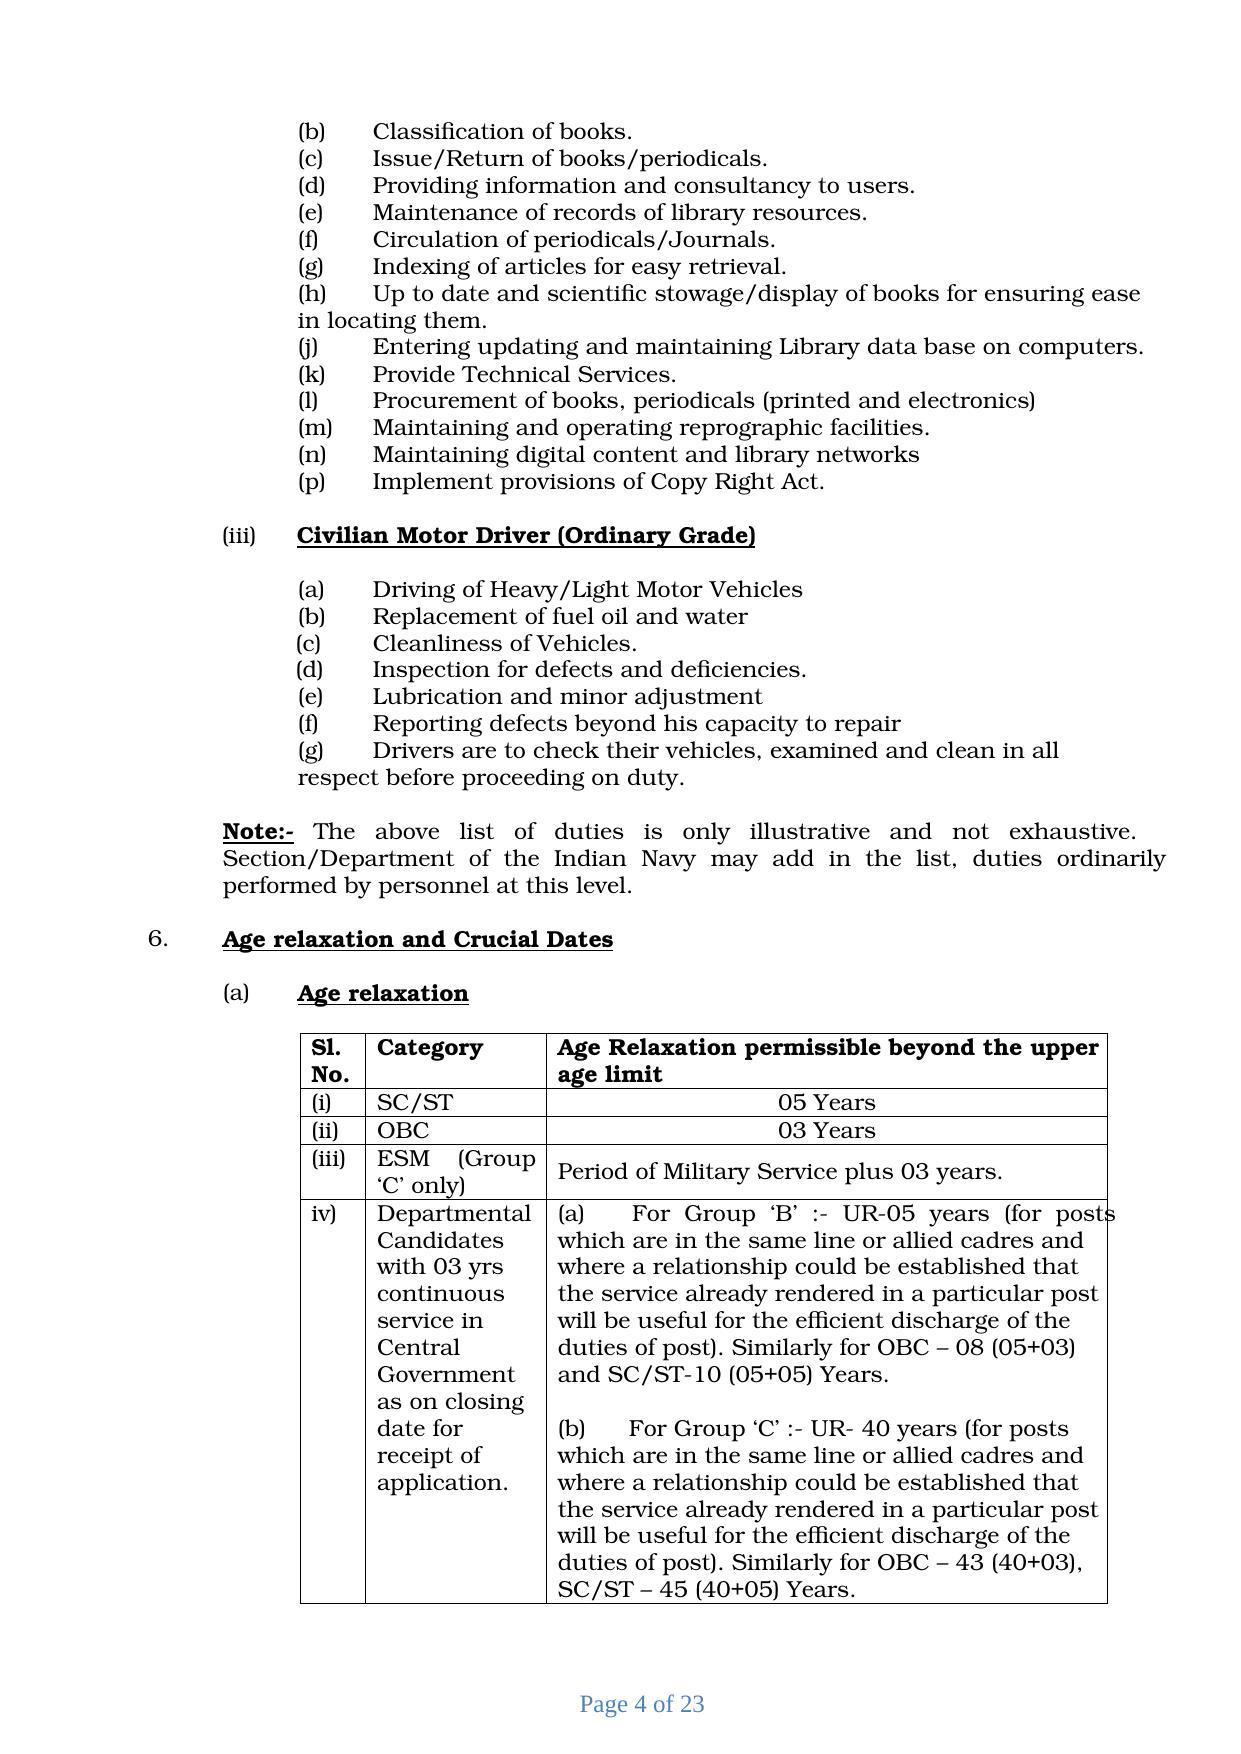 Western Naval Command Mumbai Staff Nurse, Library & Information Assistant, Civilian Motor Driver Recruitment 2022 - Page 7